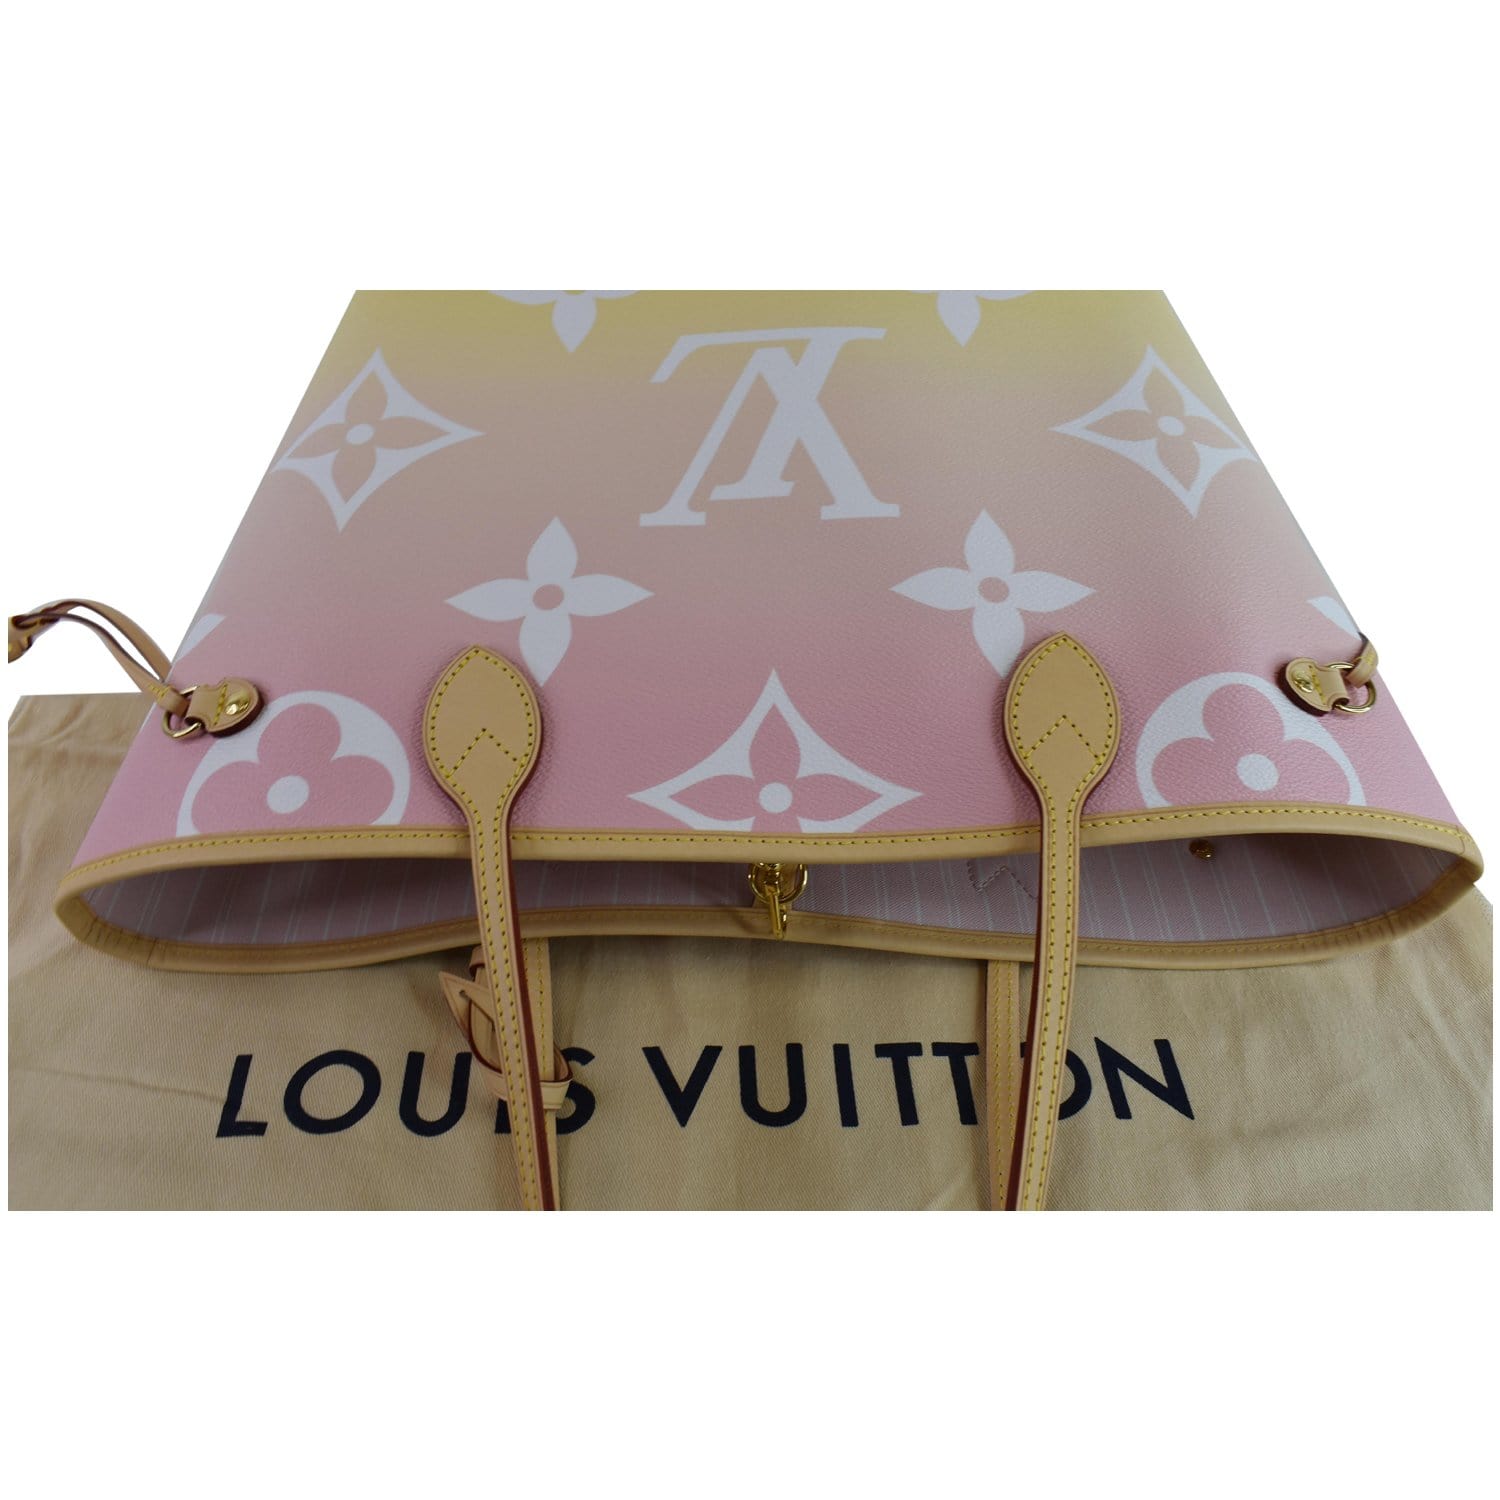 Louis Vuitton Neverfull NM Tote By The Pool Monogram Giant MM - ShopStyle